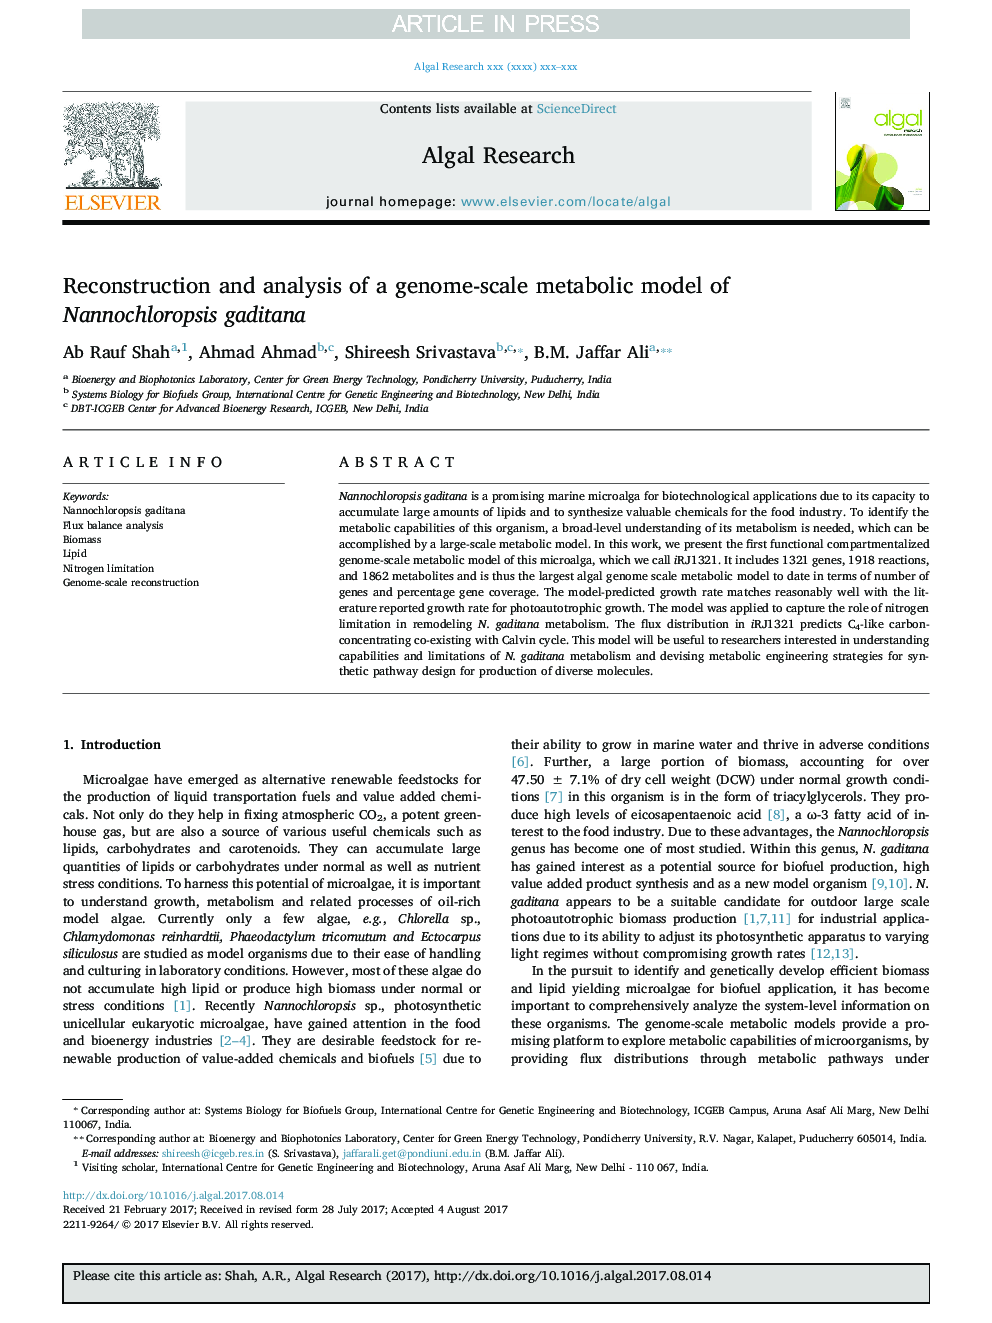 Reconstruction and analysis of a genome-scale metabolic model of Nannochloropsis gaditana